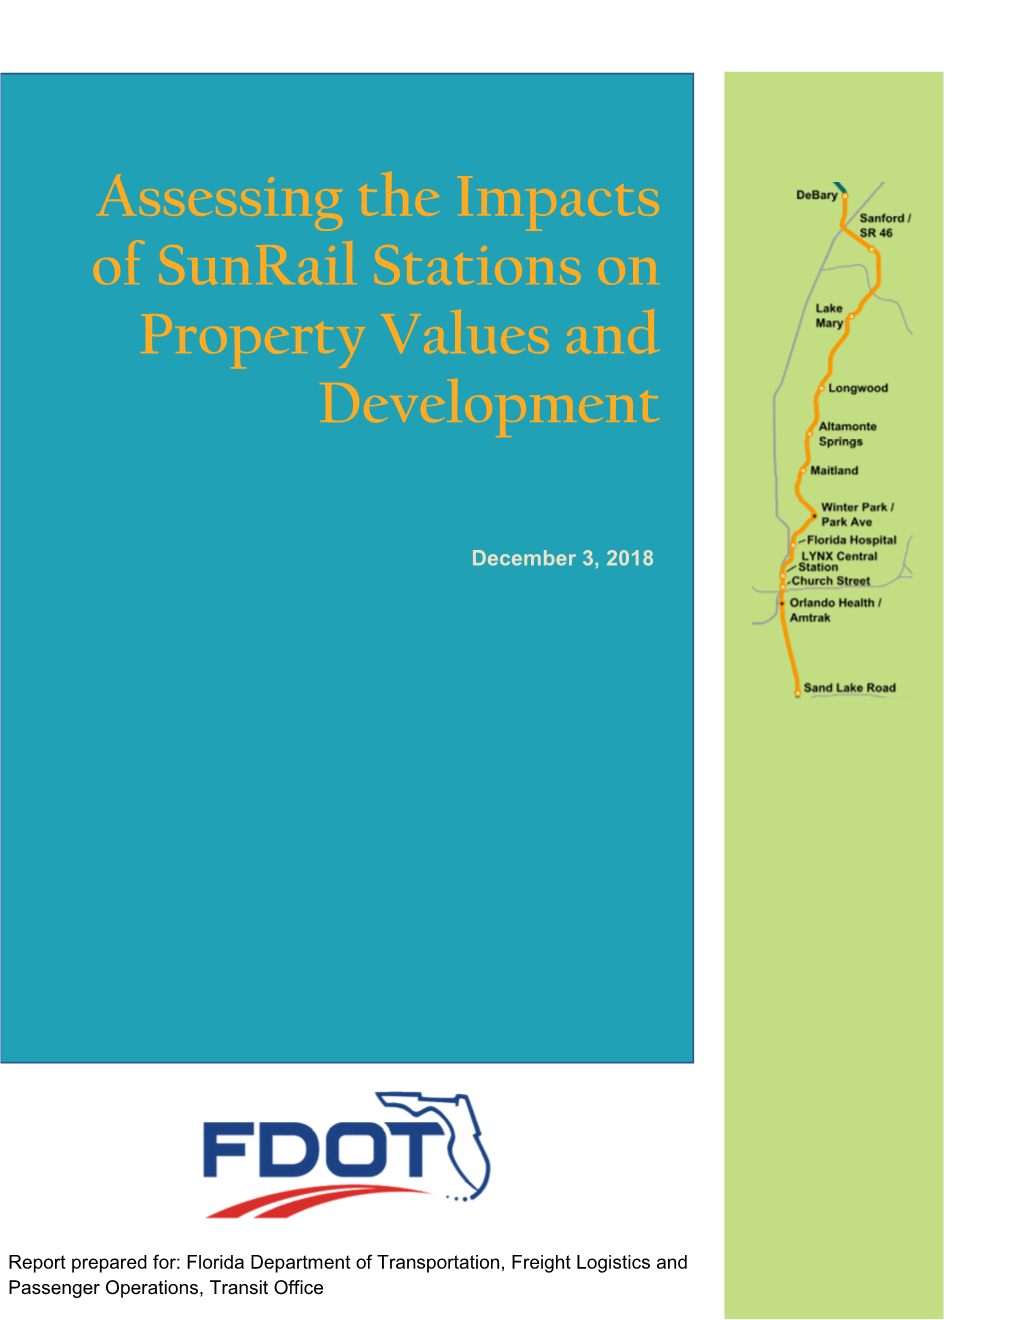 Assessing the Impacts of Sunrail Stations on Property Values and Development